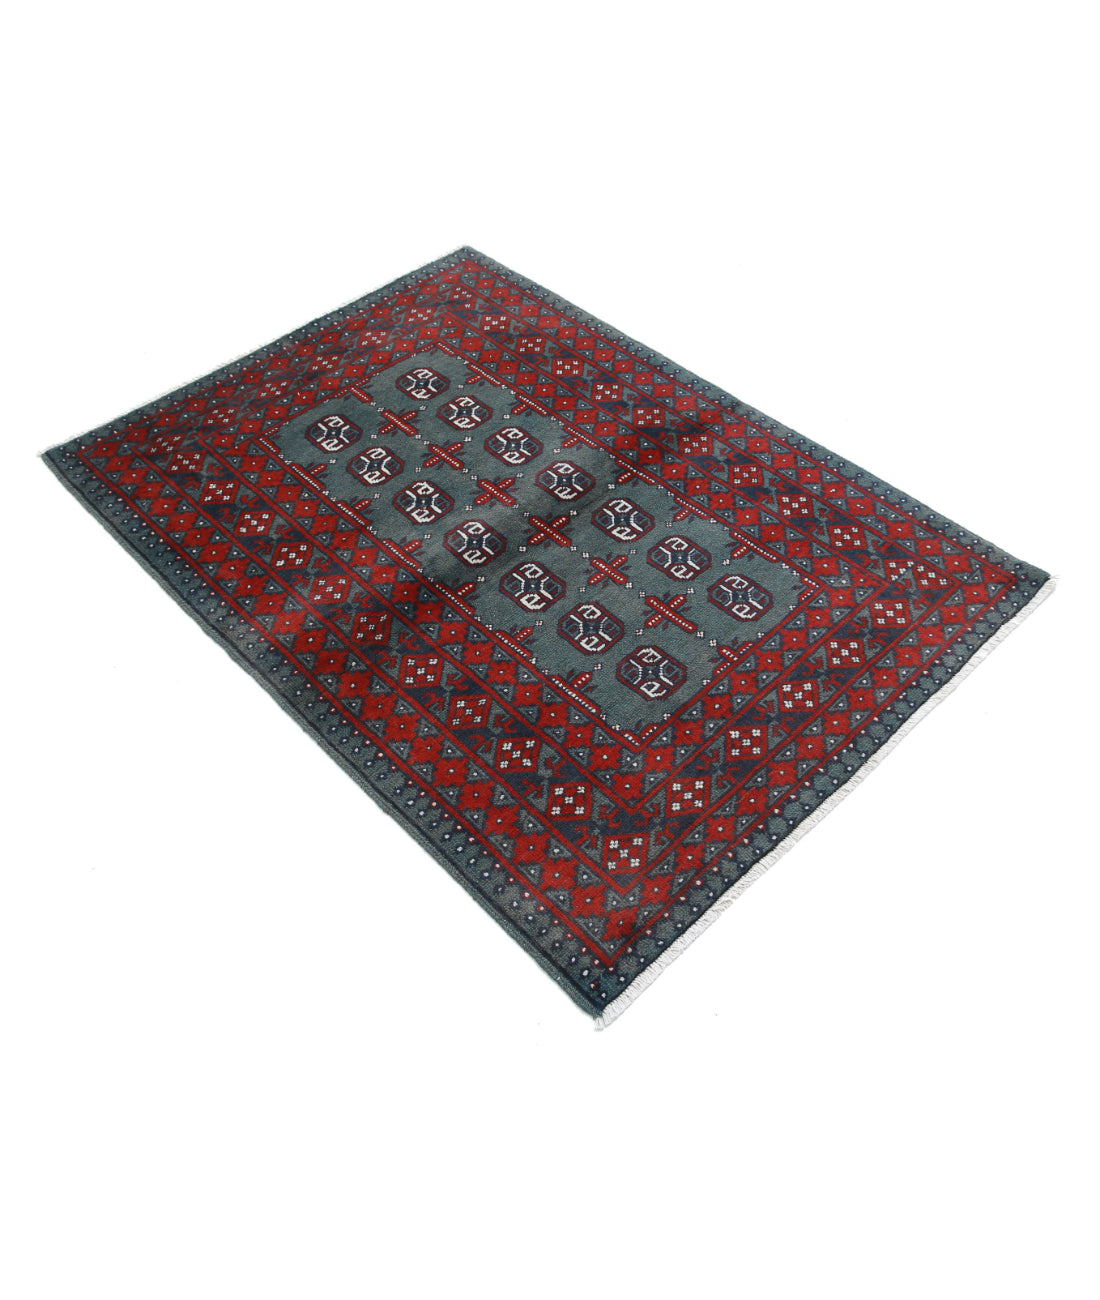 Revival 3'6'' X 4'9'' Hand-Knotted Wool Rug 3'6'' x 4'9'' (105 X 143) / Green / Red